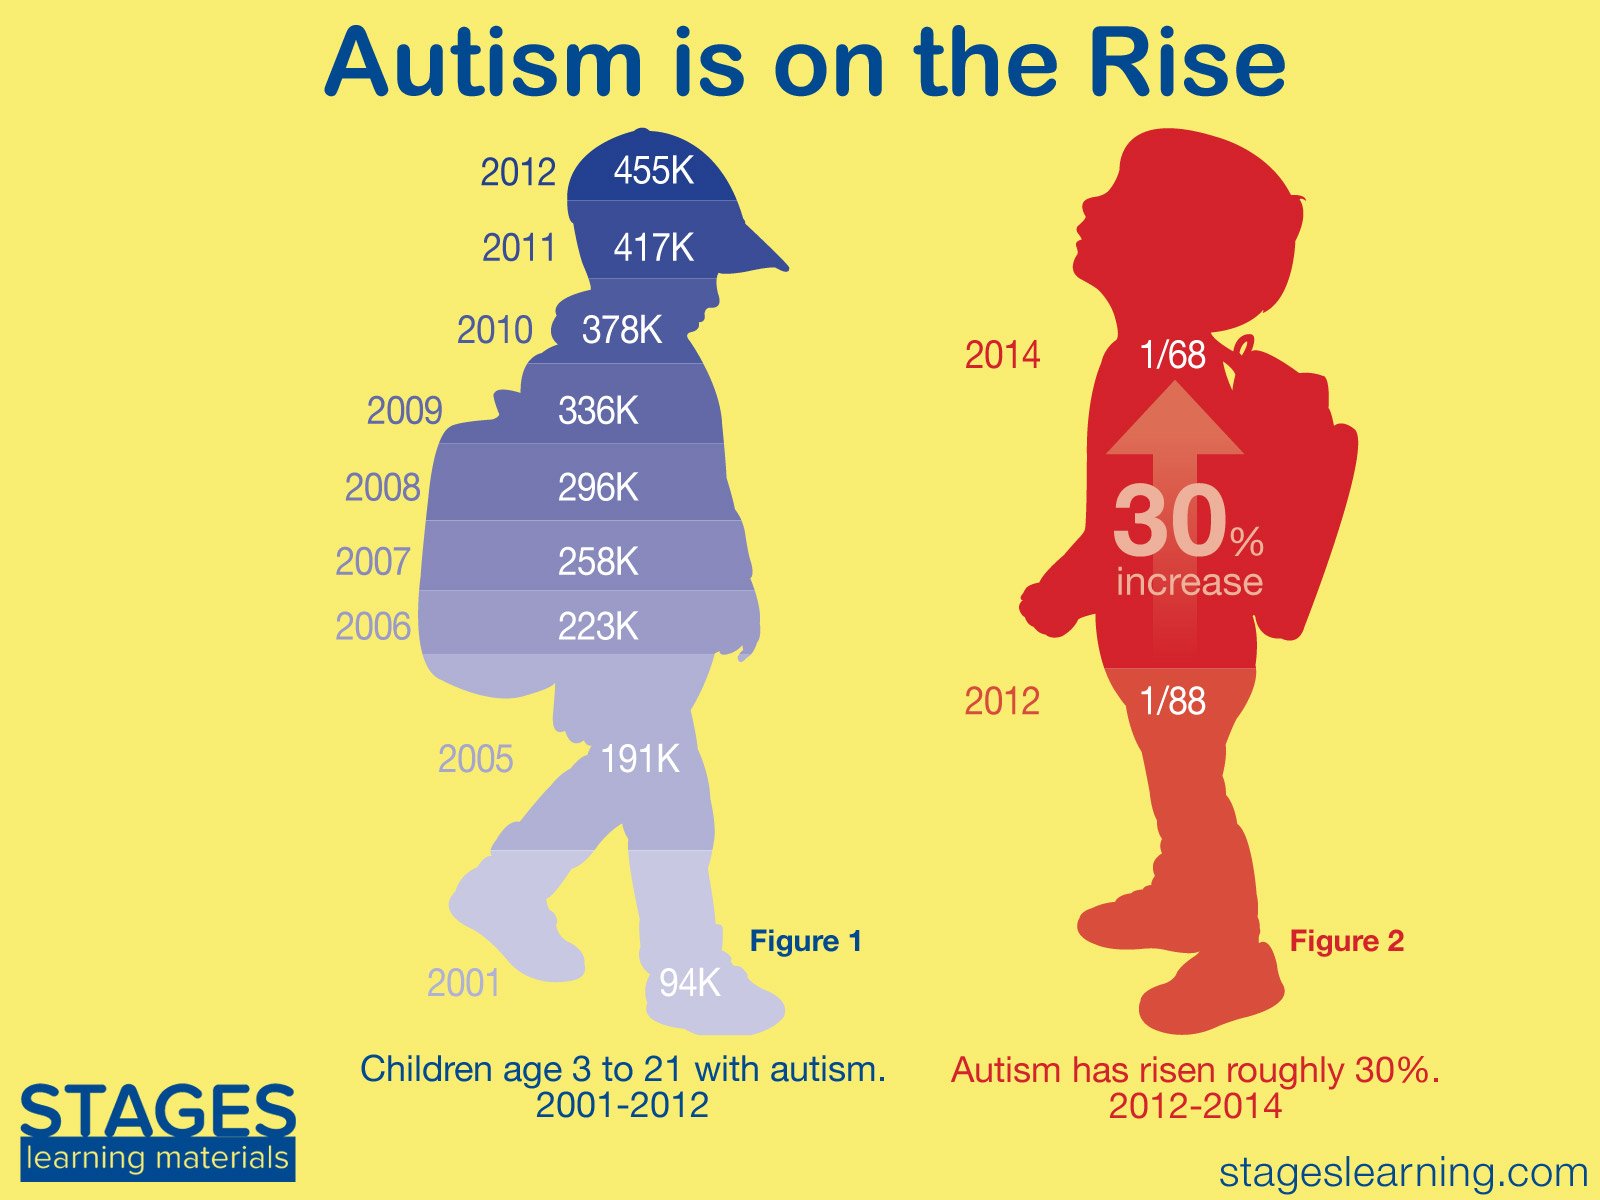 Autism is on the Rise